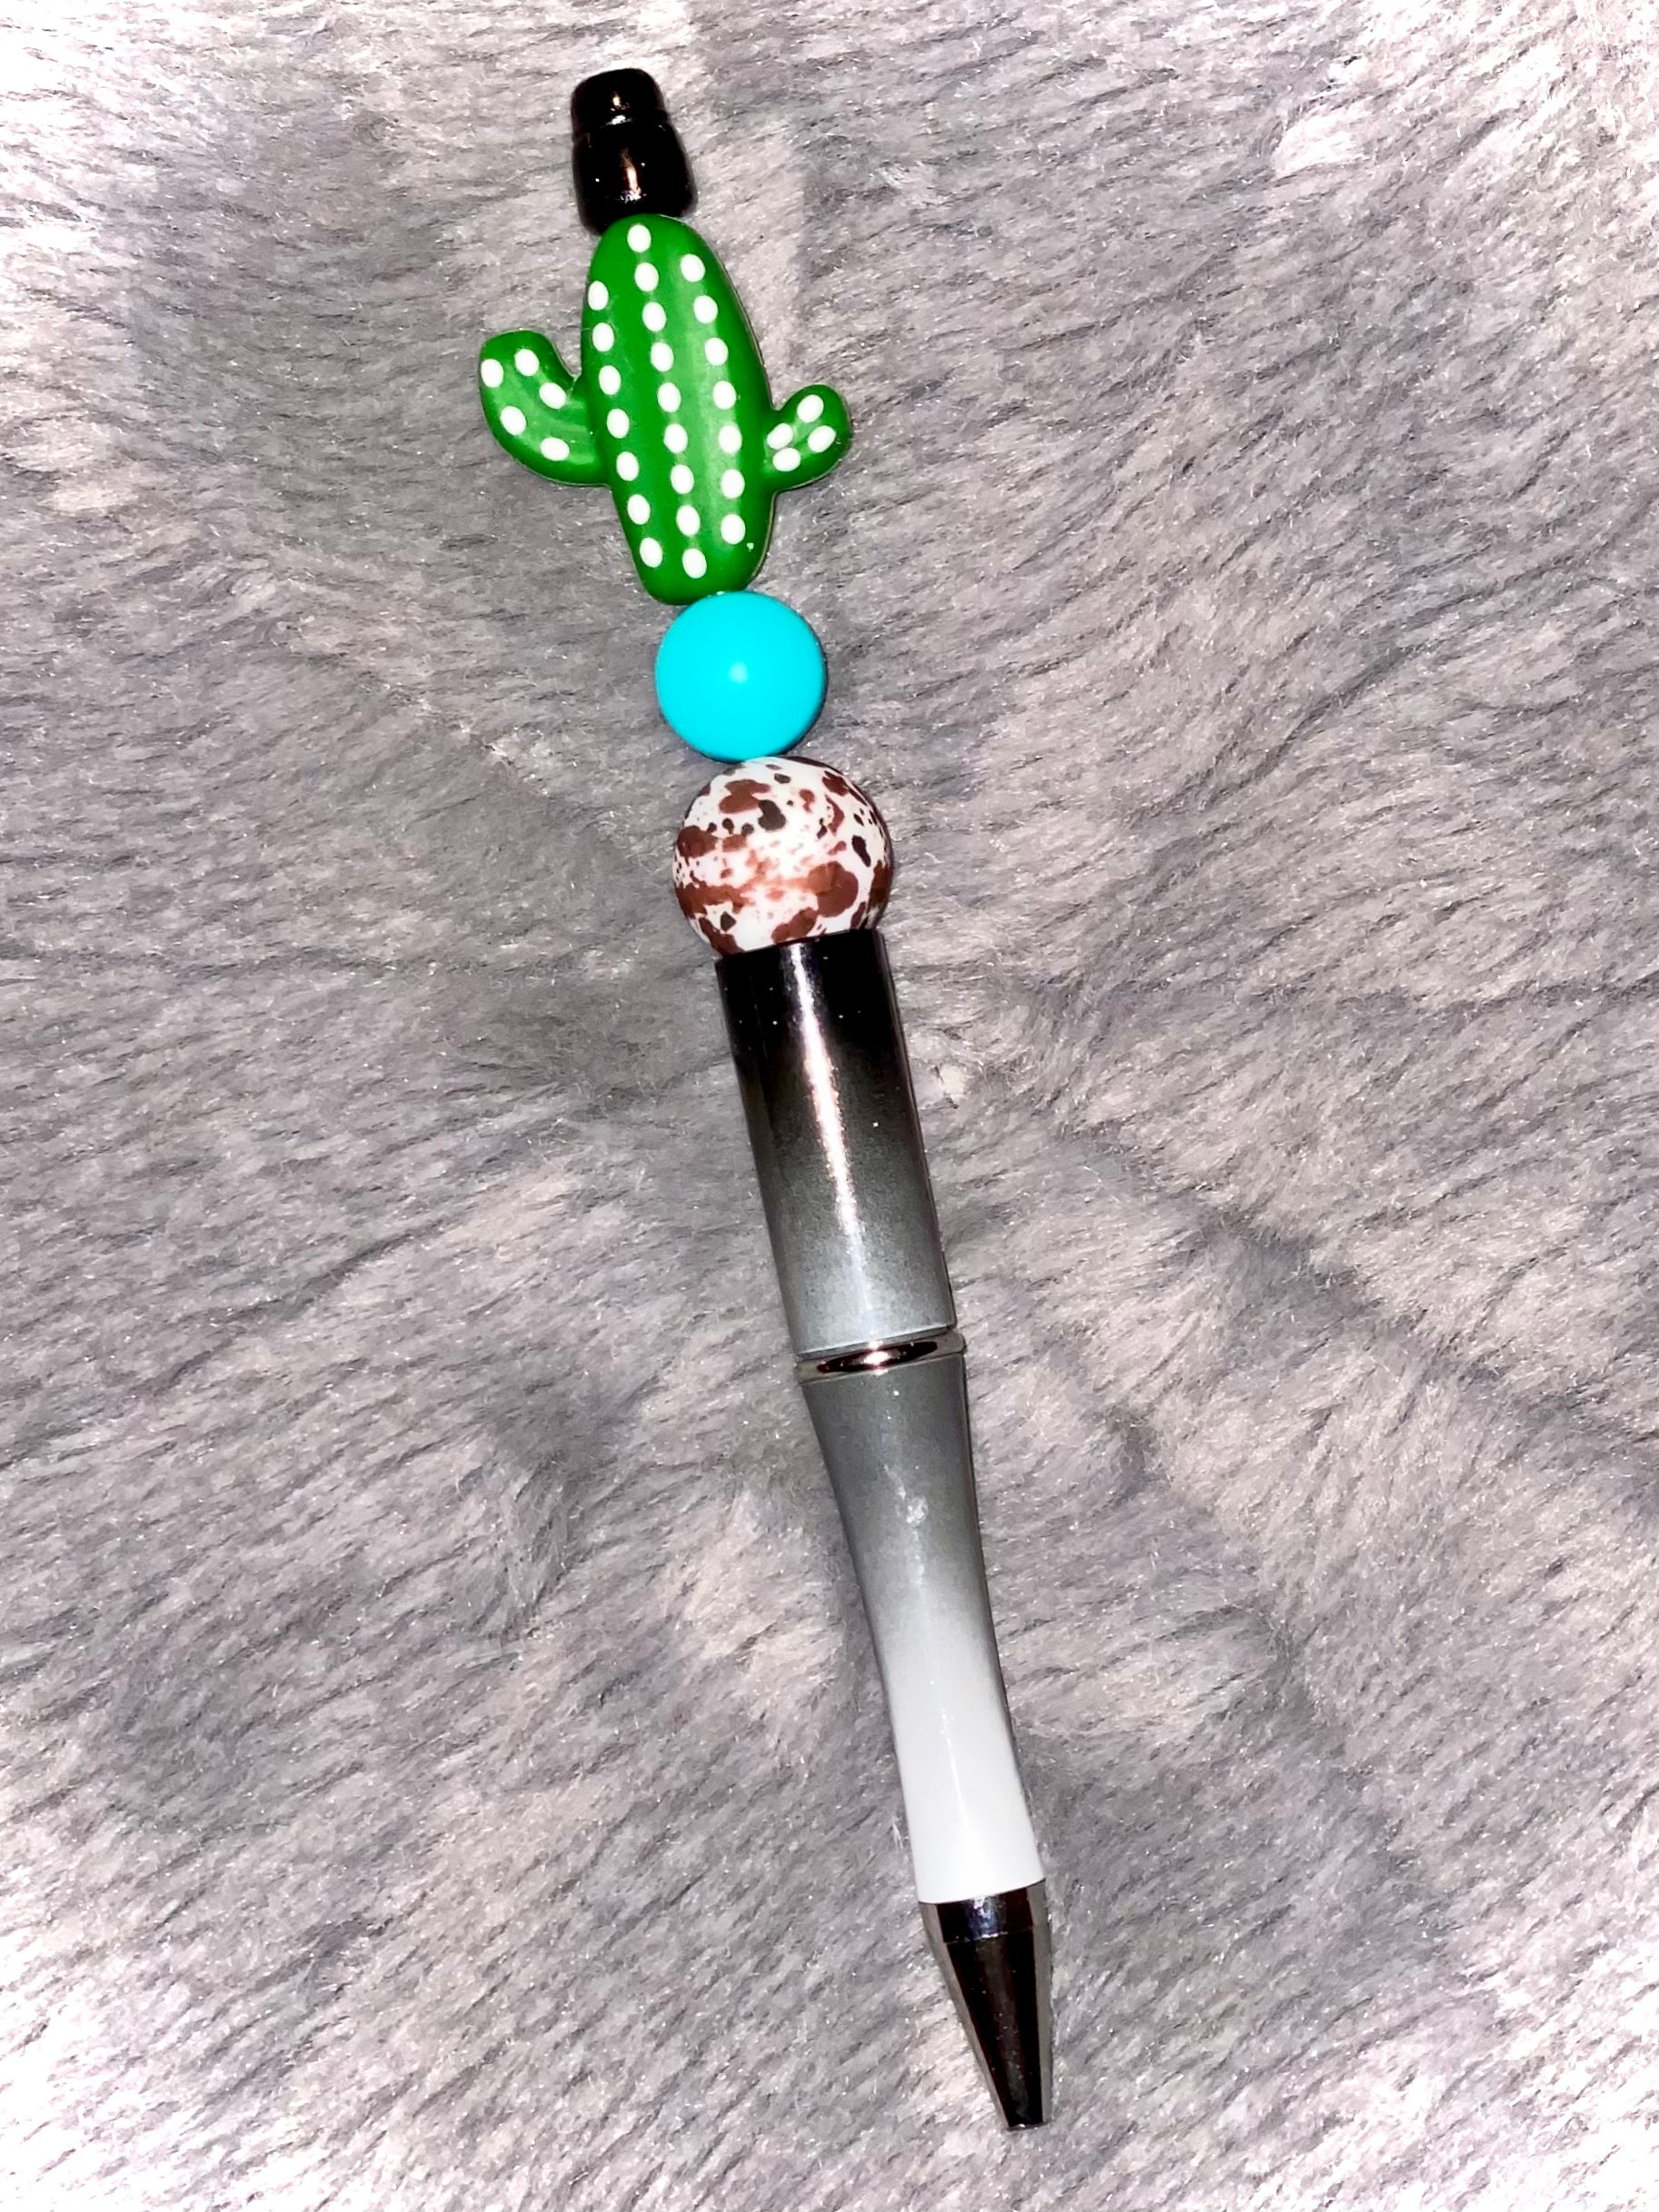 FUN PENS - CountryFide Custom Accessories and Outdoors